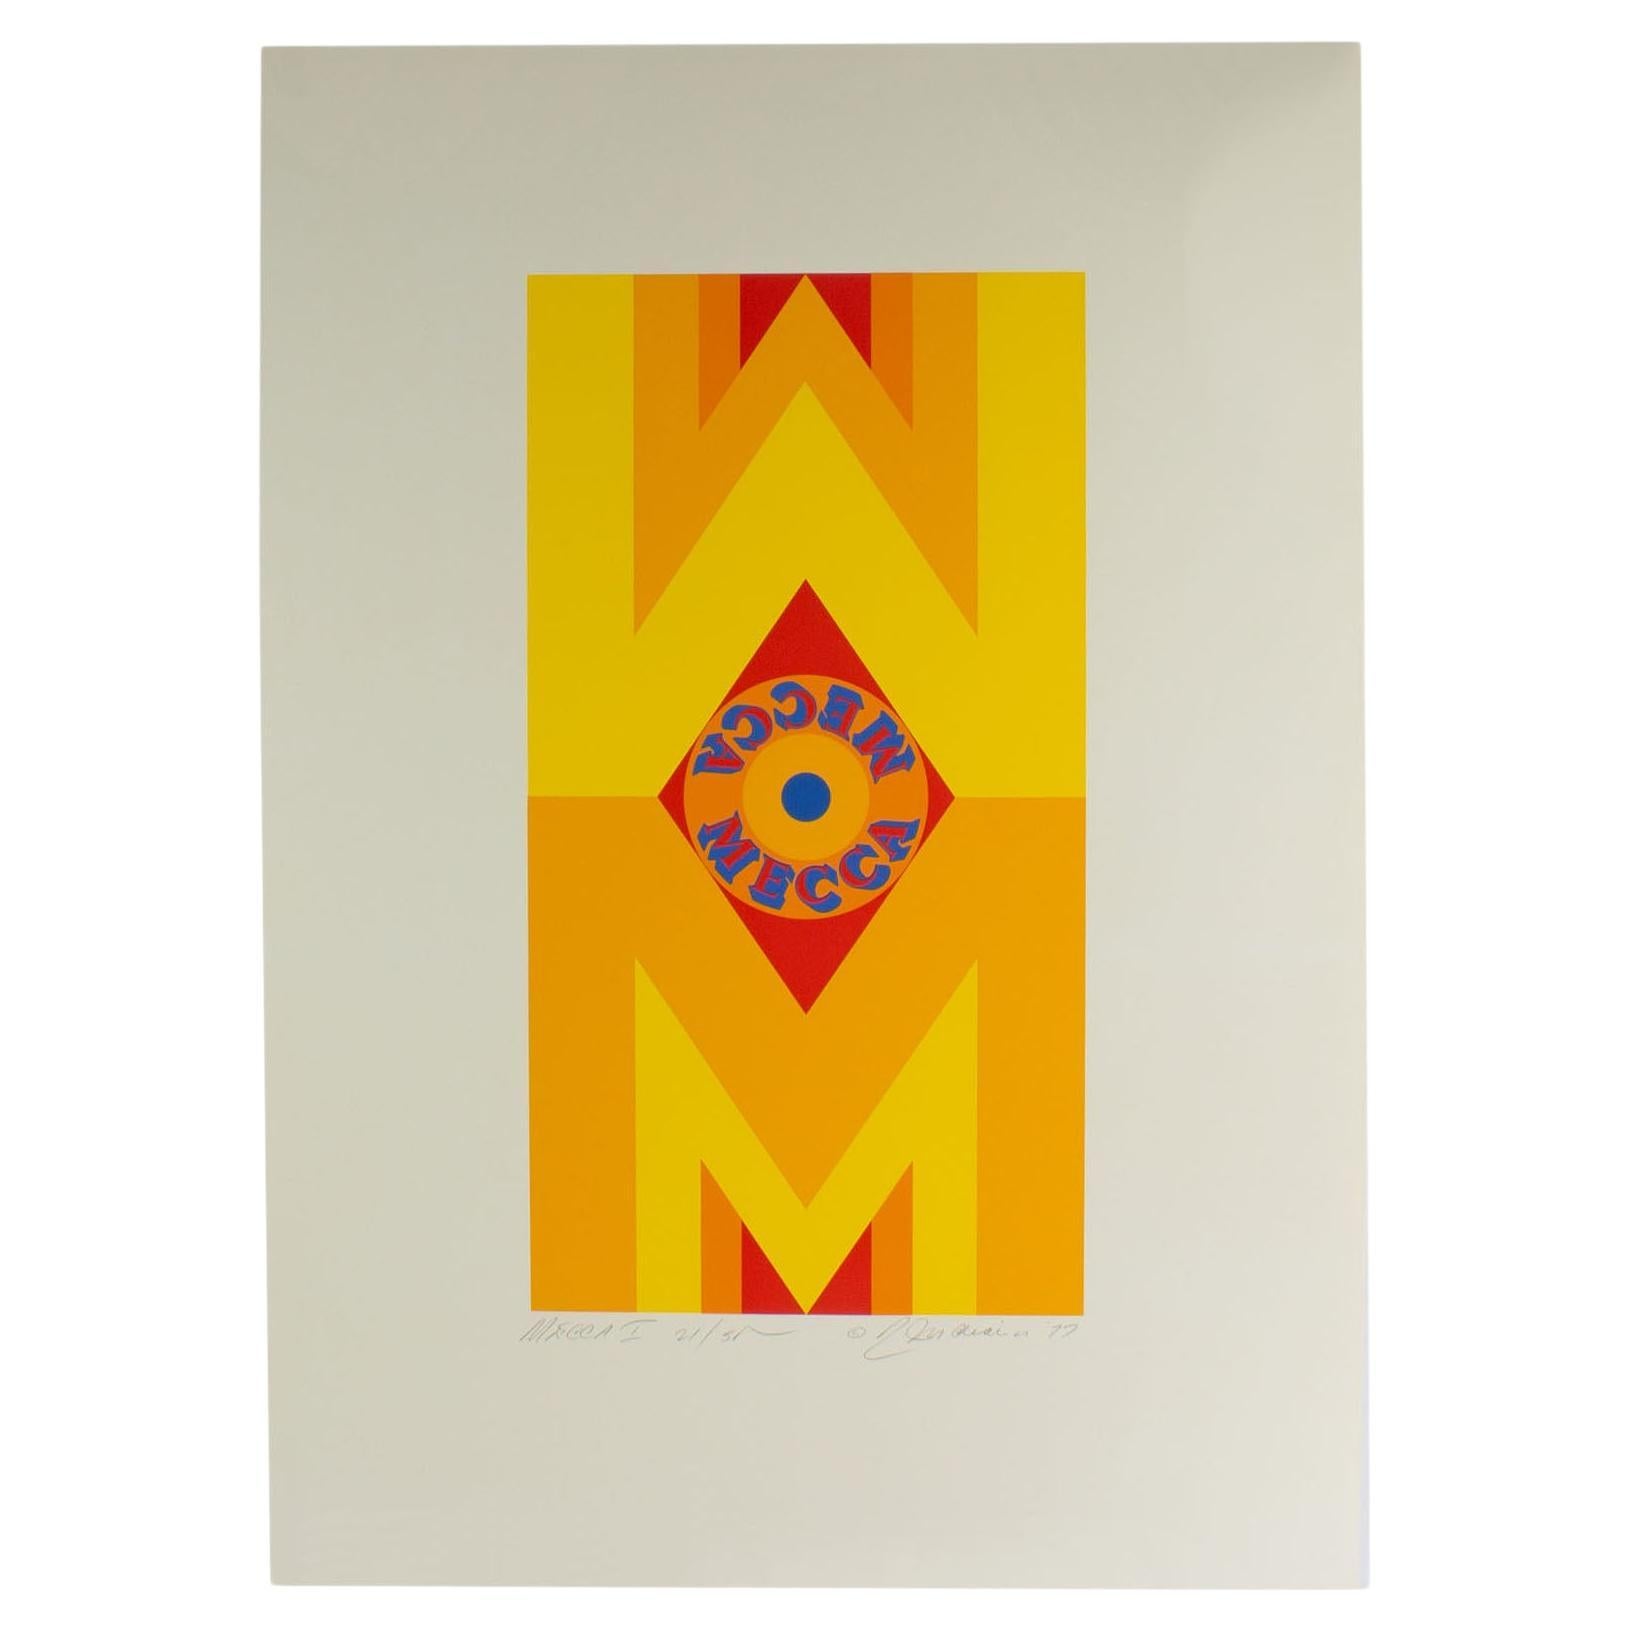 Robert Indiana Signed 1977 “Mecca I” Limited Edition Serigraph